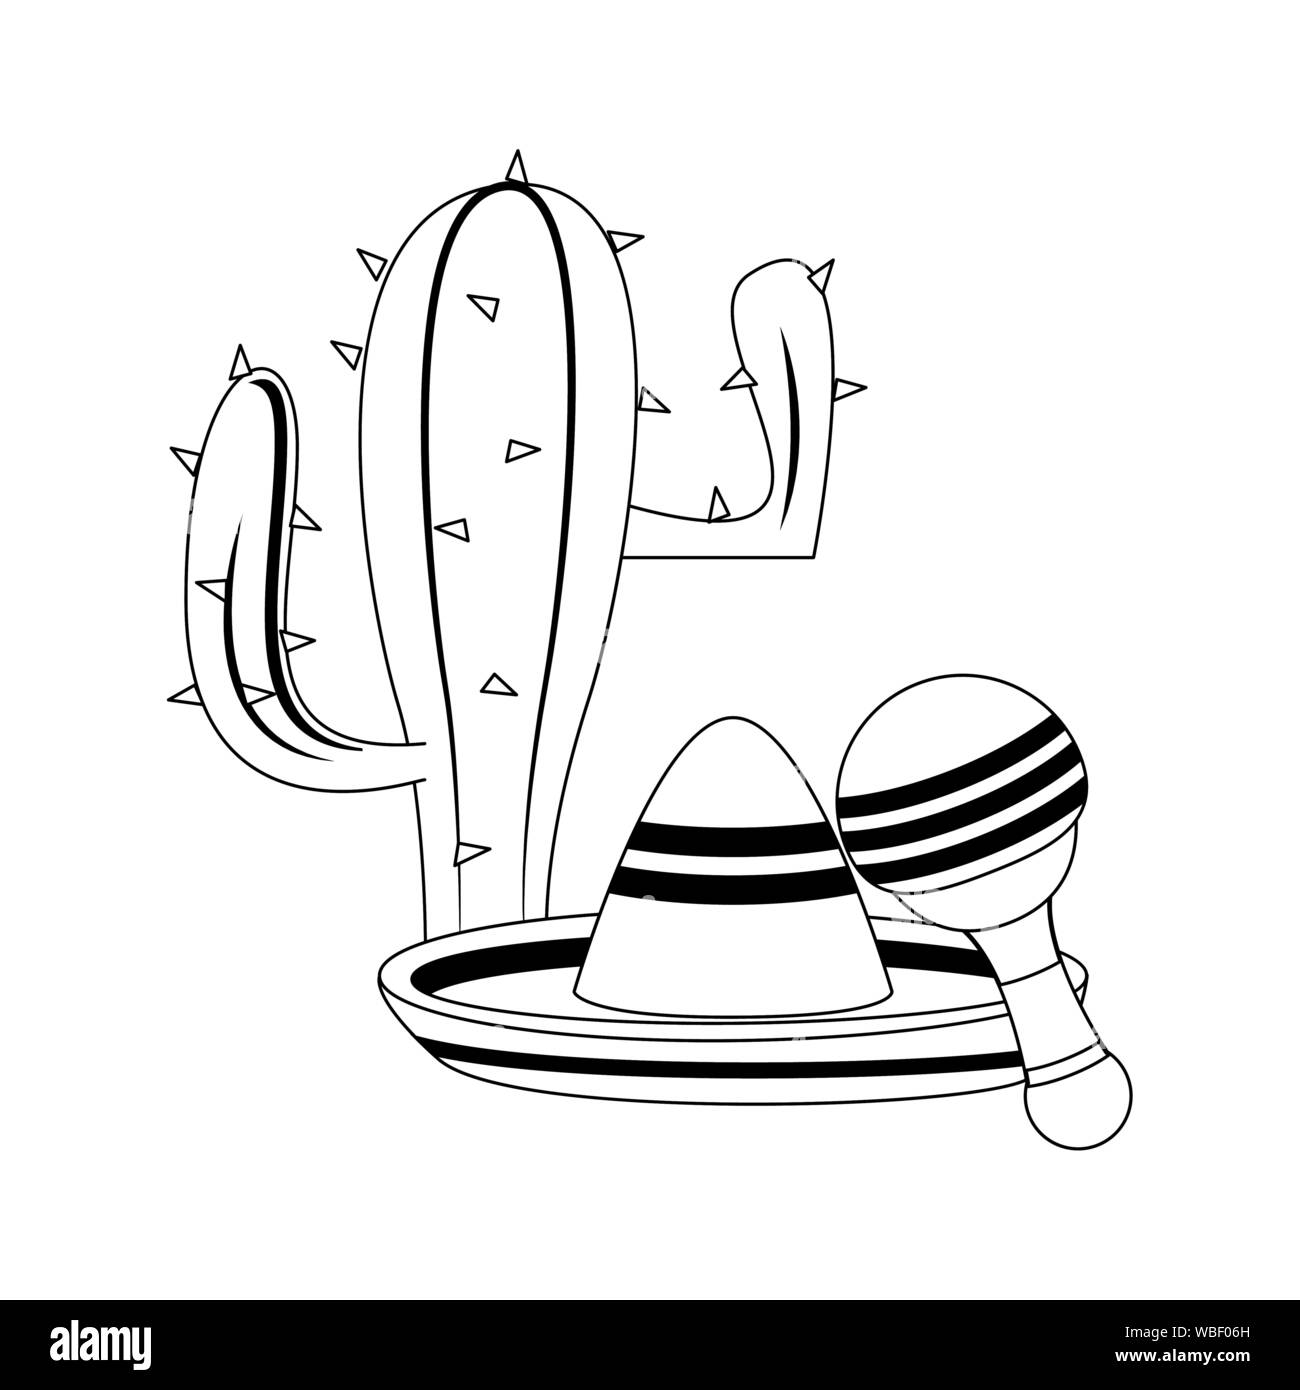 mexico culture and foods cartoons in black and white Stock Vector Image ...